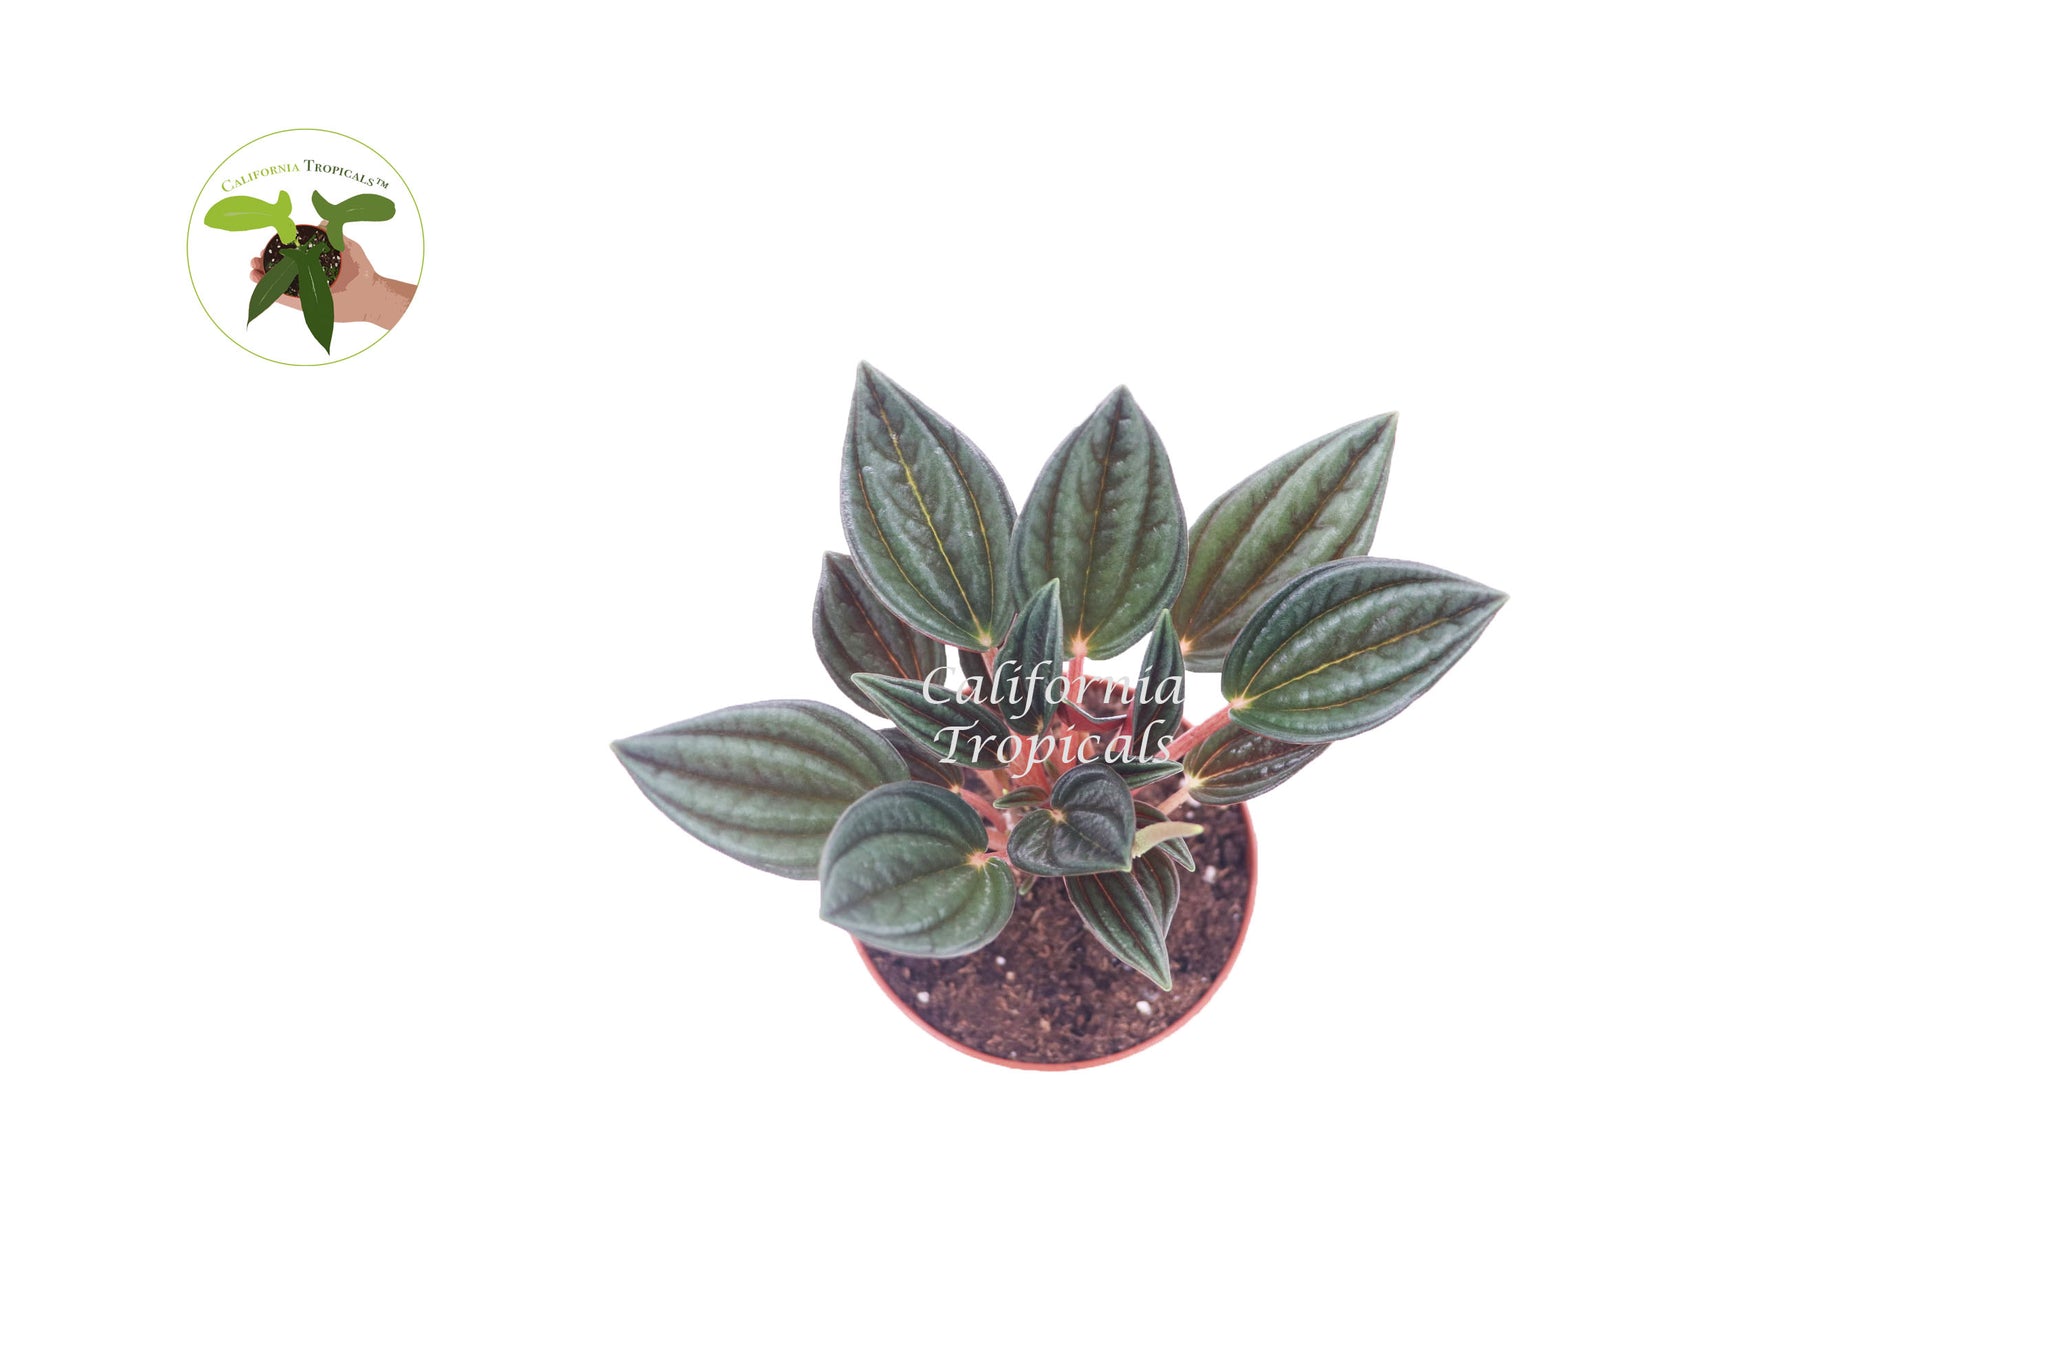 Peperomia Rosso - 2'' from California Tropicals